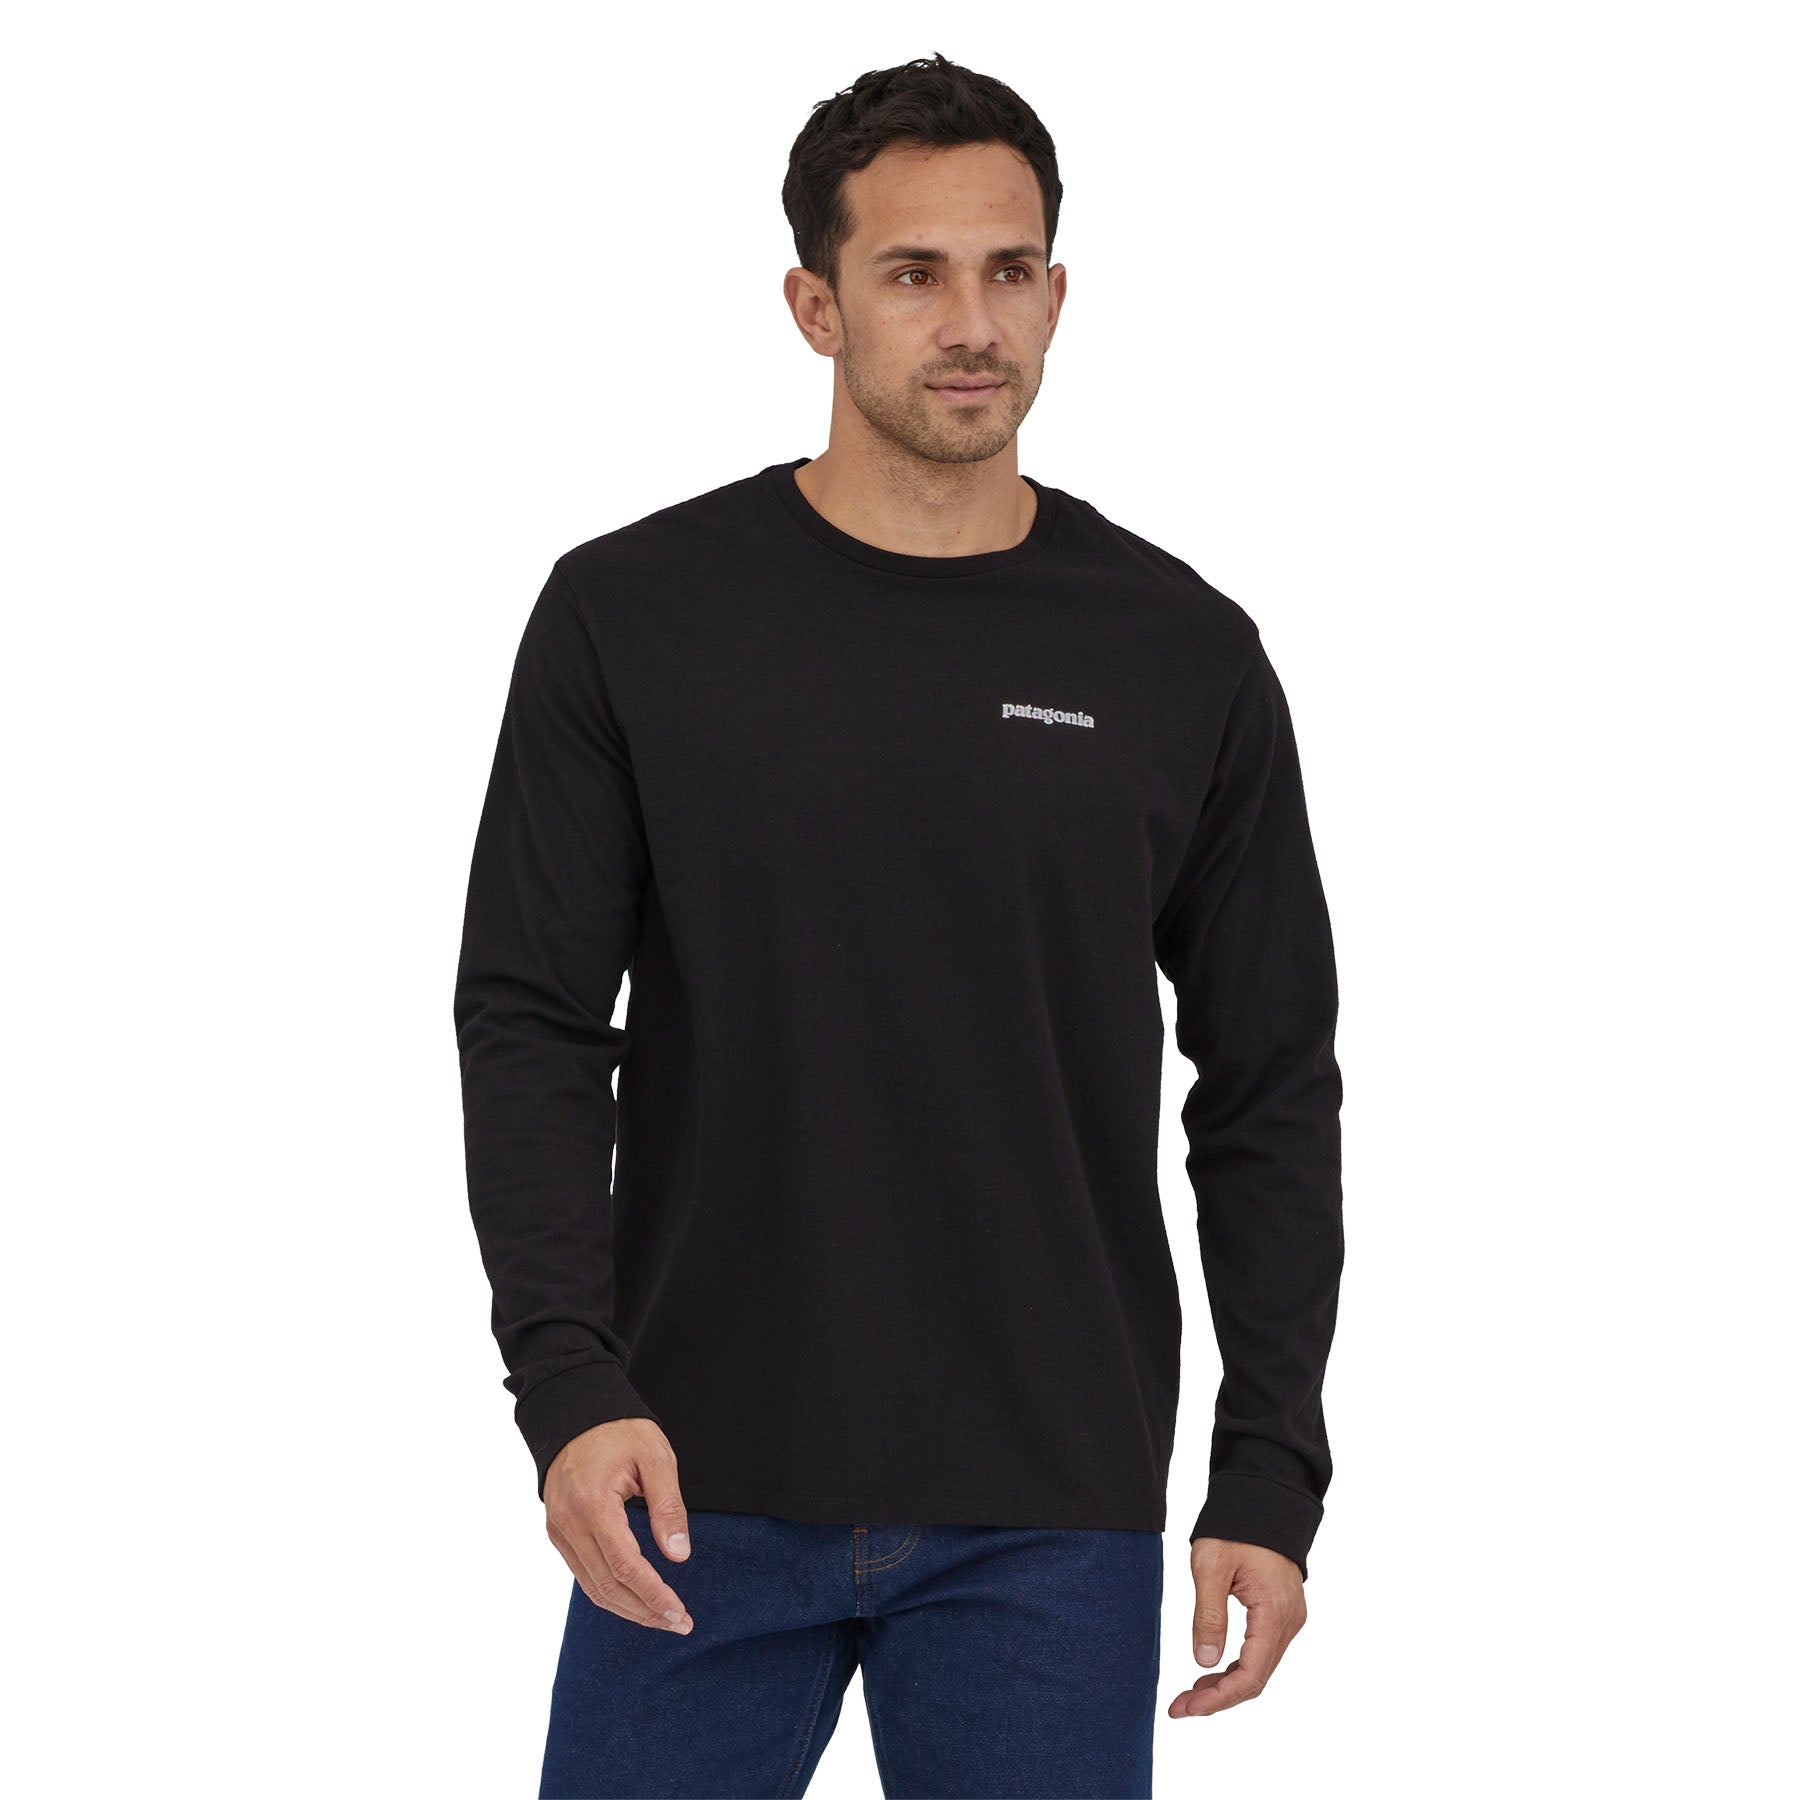 M's Long-Sleeved Home Water Trout Responsibili-Tee®